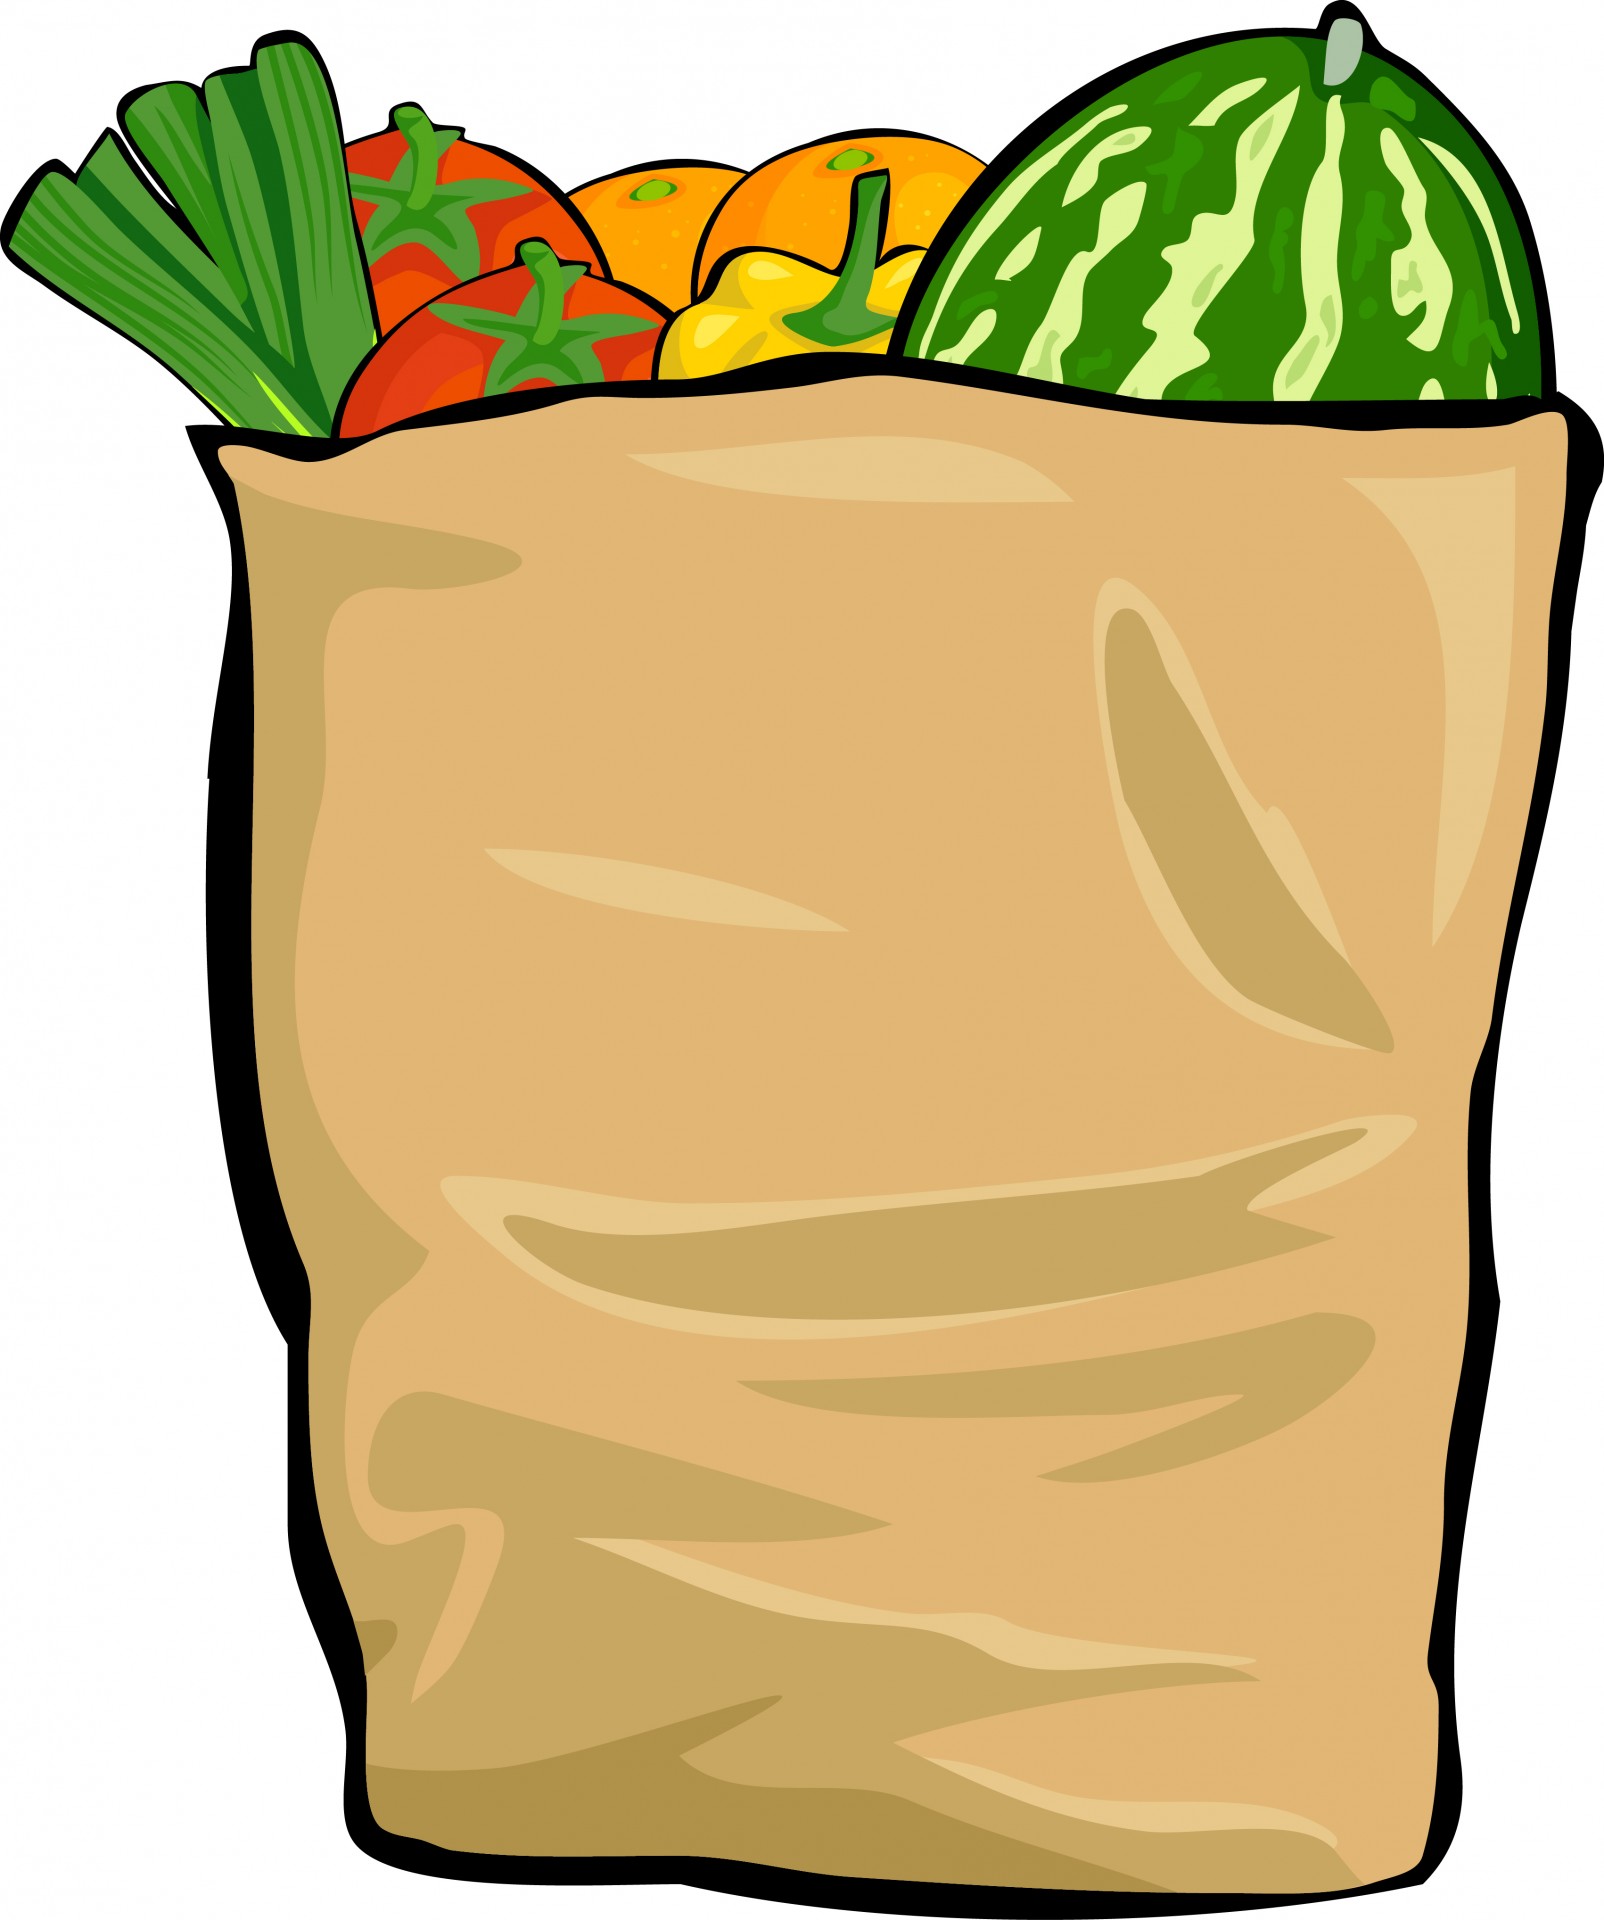 free clip art bag of groceries - photo #4